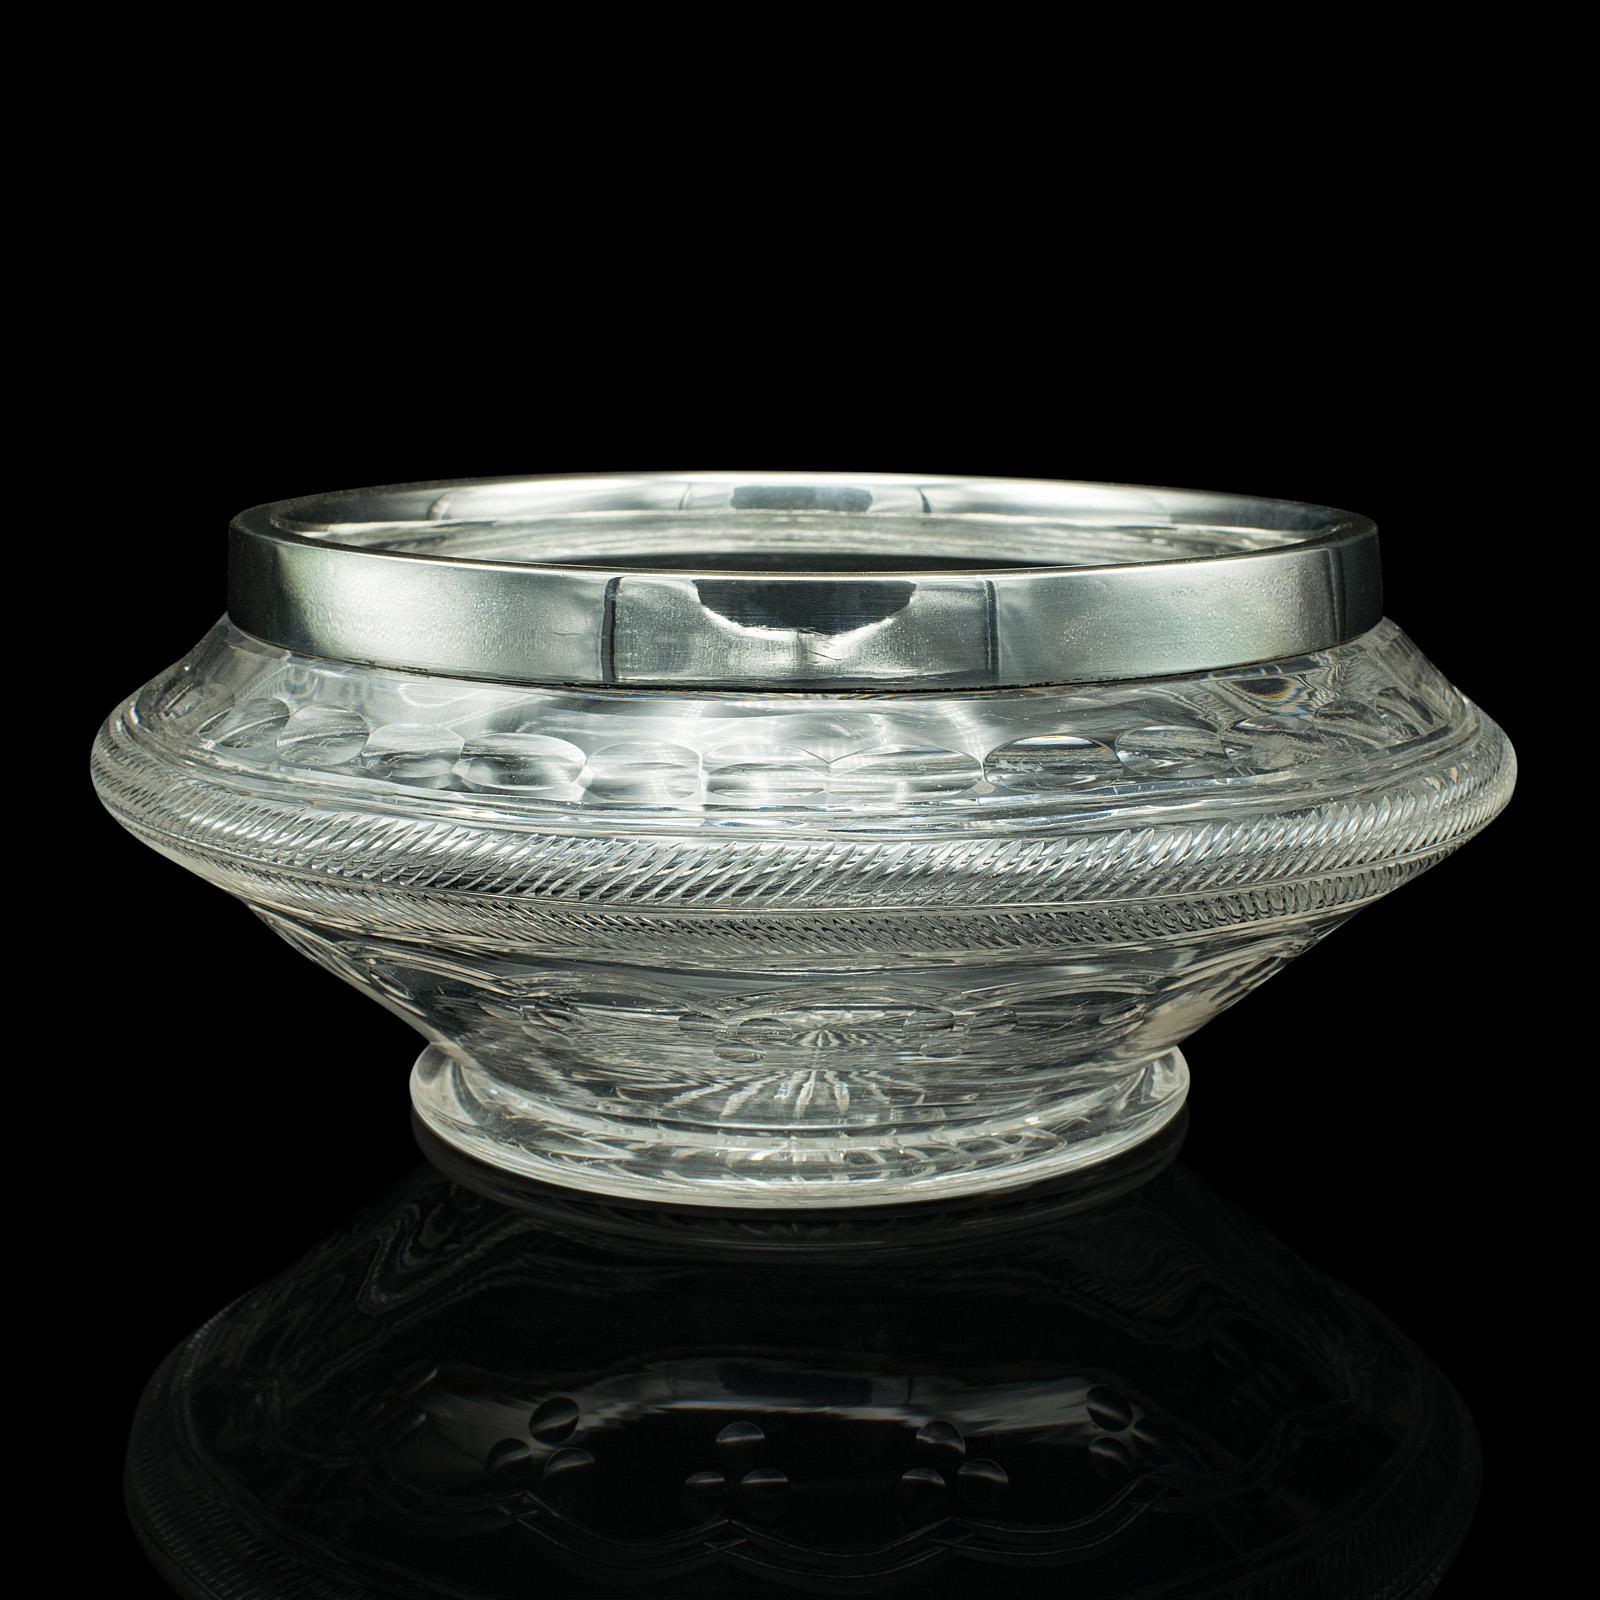 This is an antique peach bowl. An English, glass and silver plated decorative fruit bowl, dating to the Edwardian period, circa 1910.

Elegantly present your favourite fruits within this distinctive bowl
Displaying a desirable aged patina and in